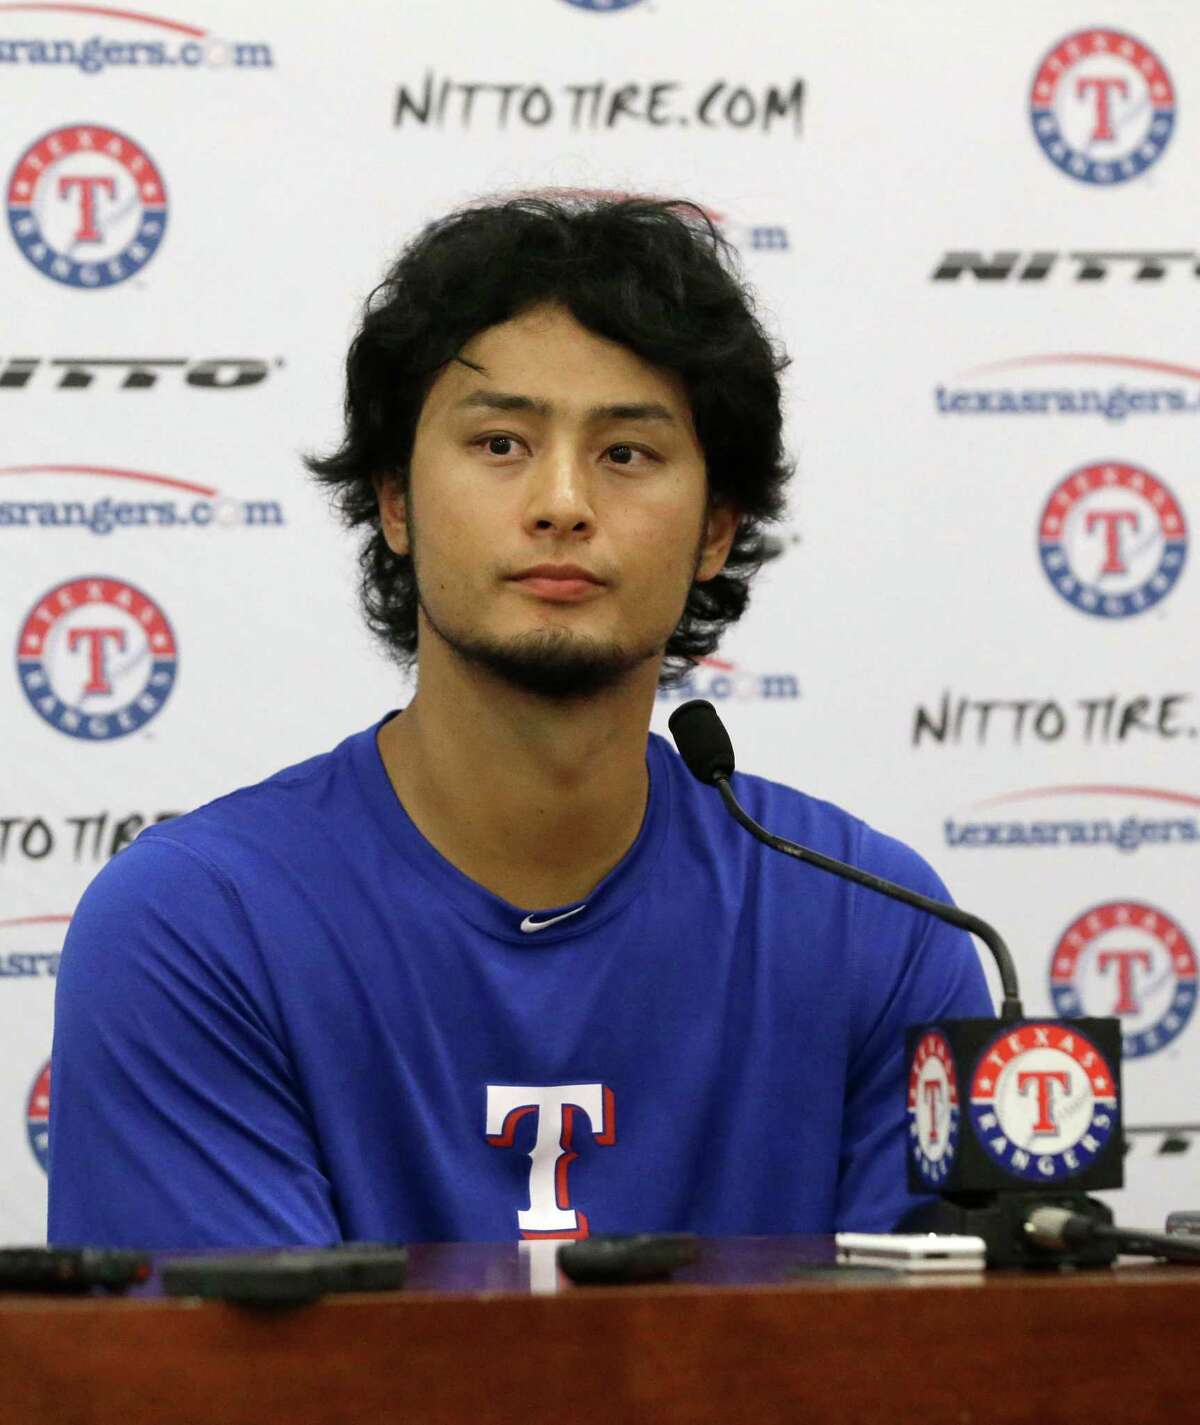 Texas Rangers right handed pitcher Yu Darvish of Japan listens to a question during a news conference Saturday, Sept. 6, 2014, in Arlington, Texas. (AP Photo/LM Otero)